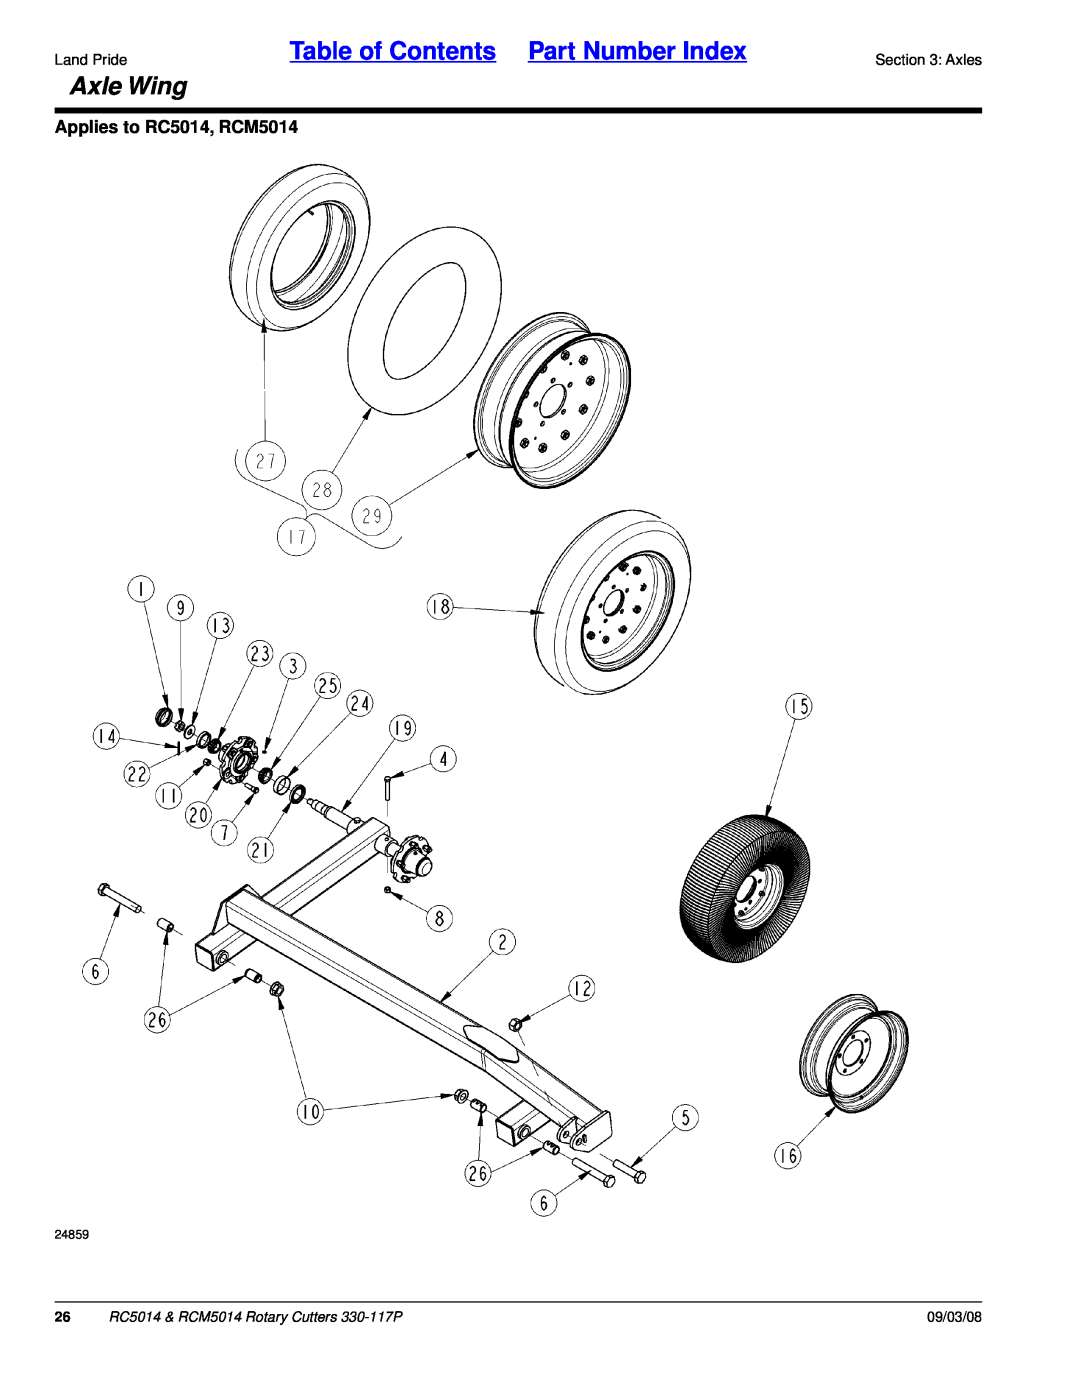 Land Pride manual Axle Wing, Table of Contents Part Number Index, Applies to RC5014, RCM5014, 09/03/08 